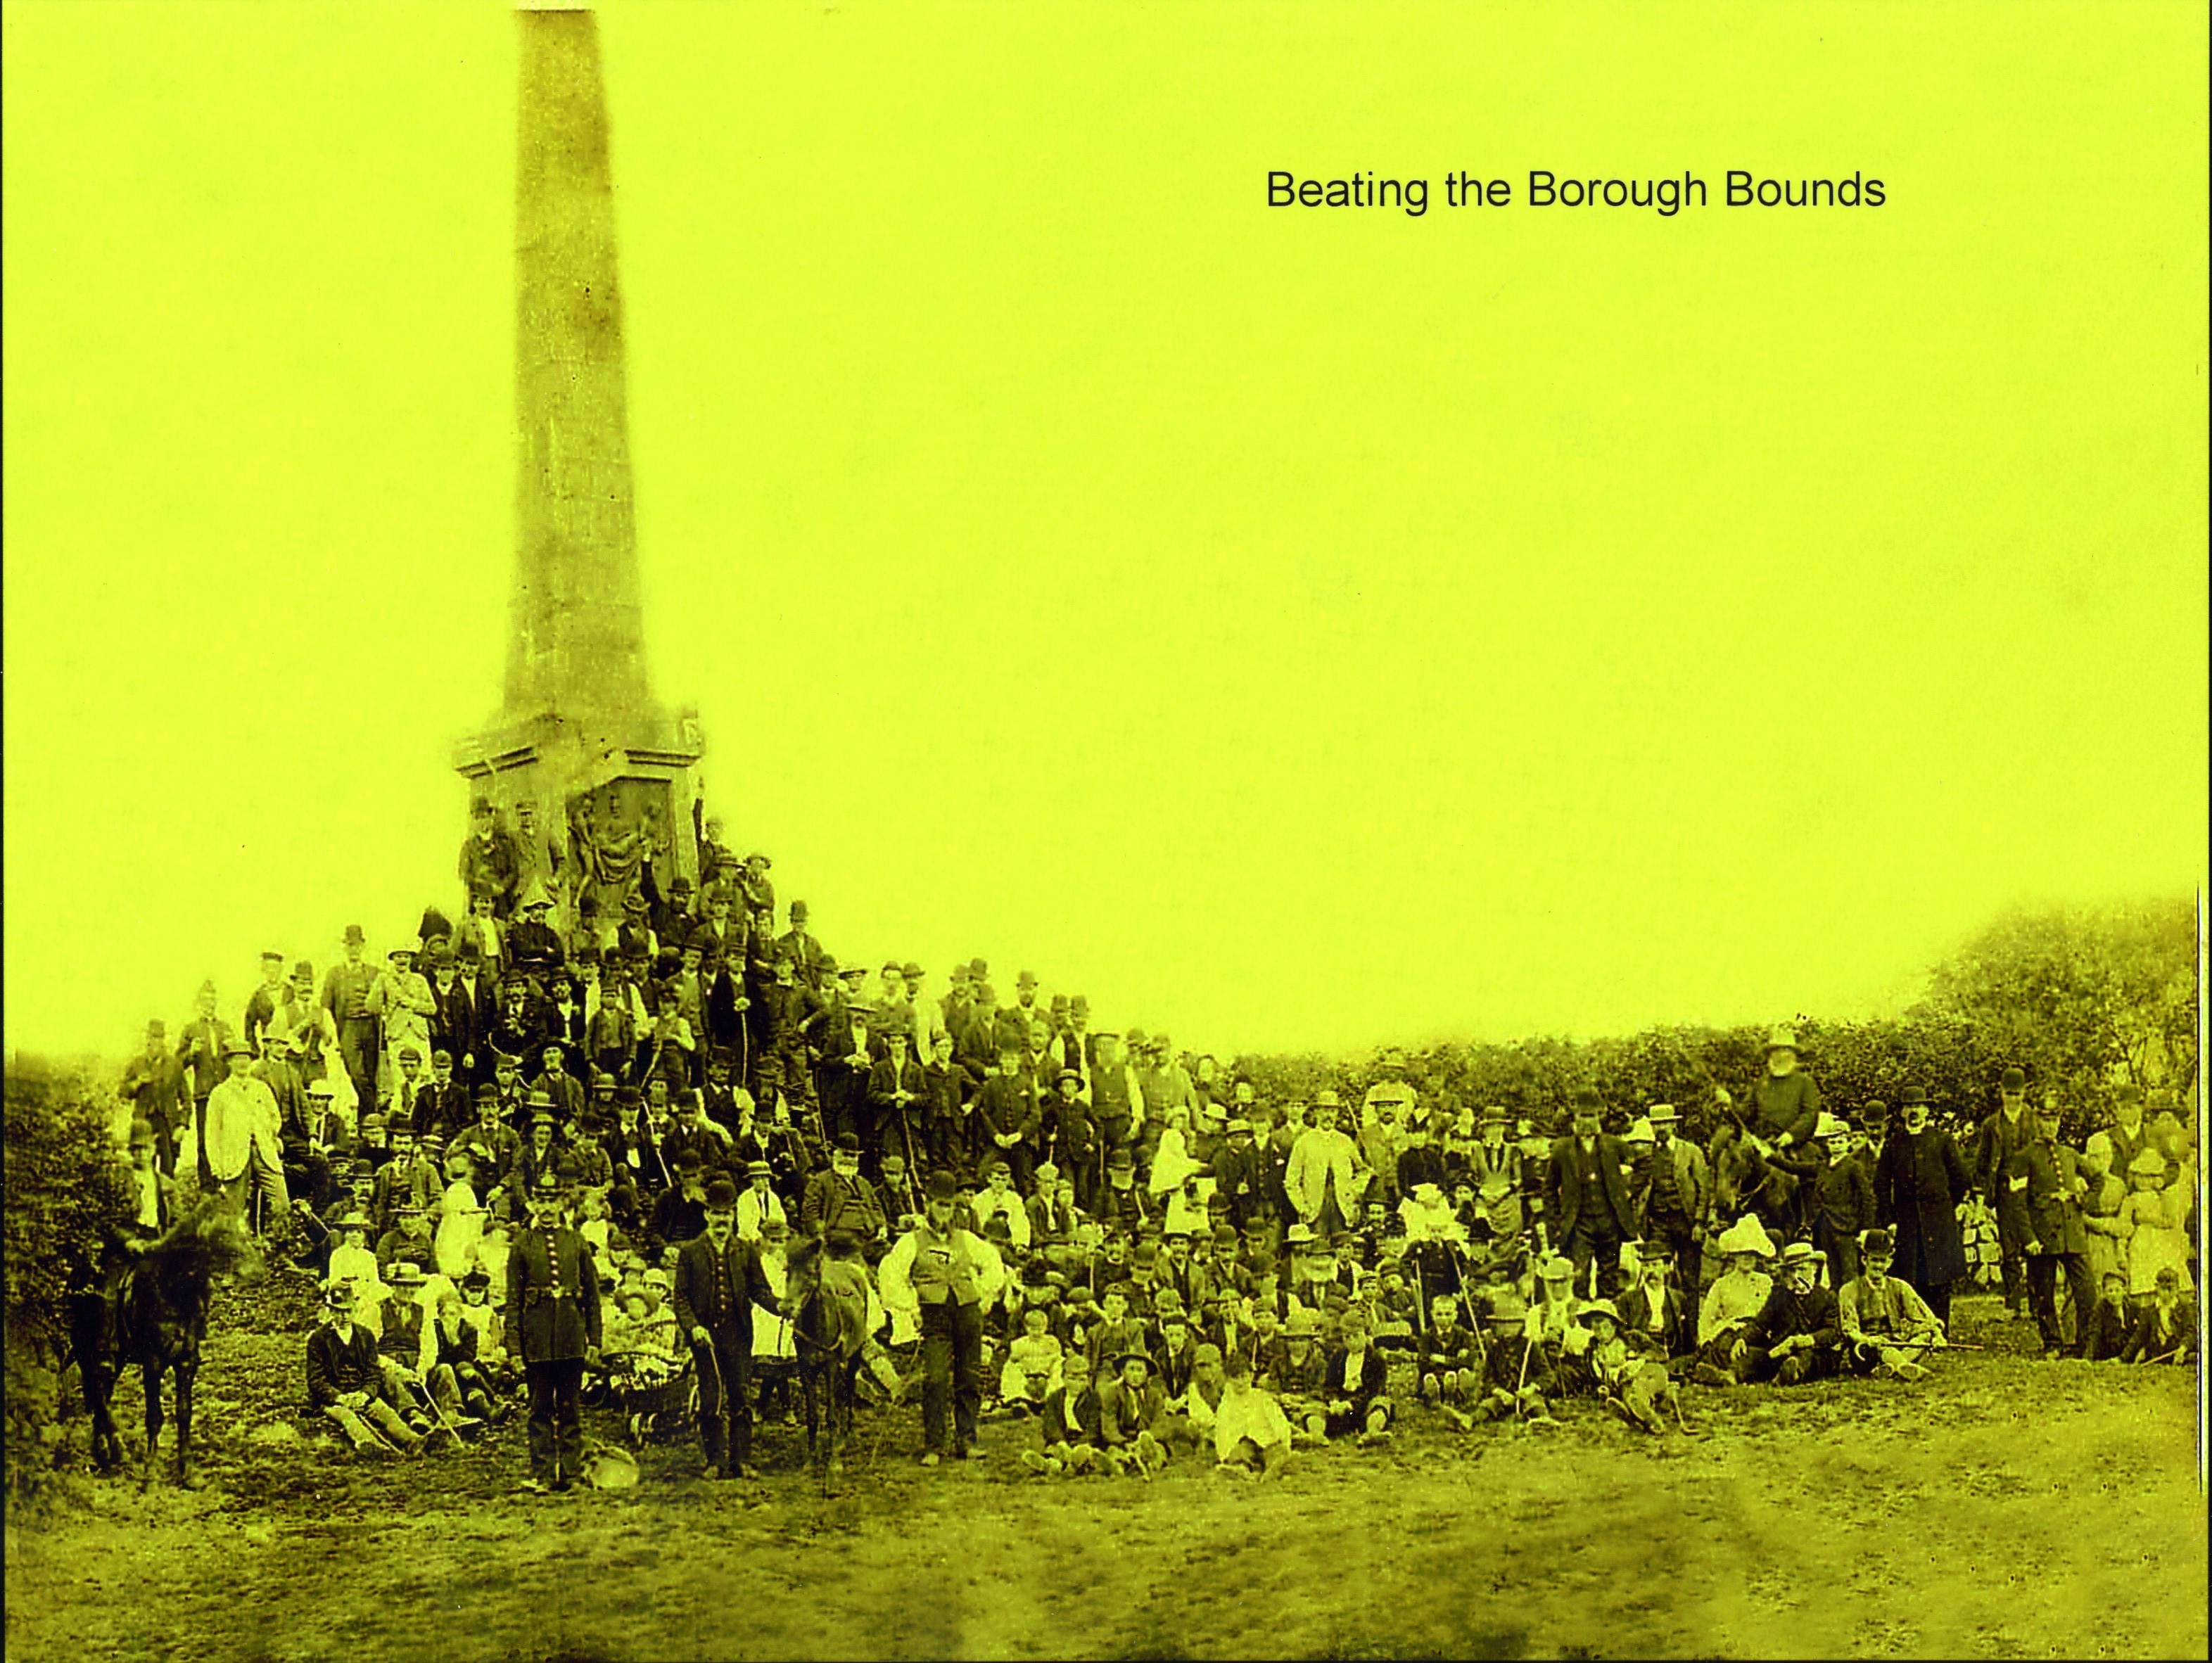 Beating the bounds - 1889